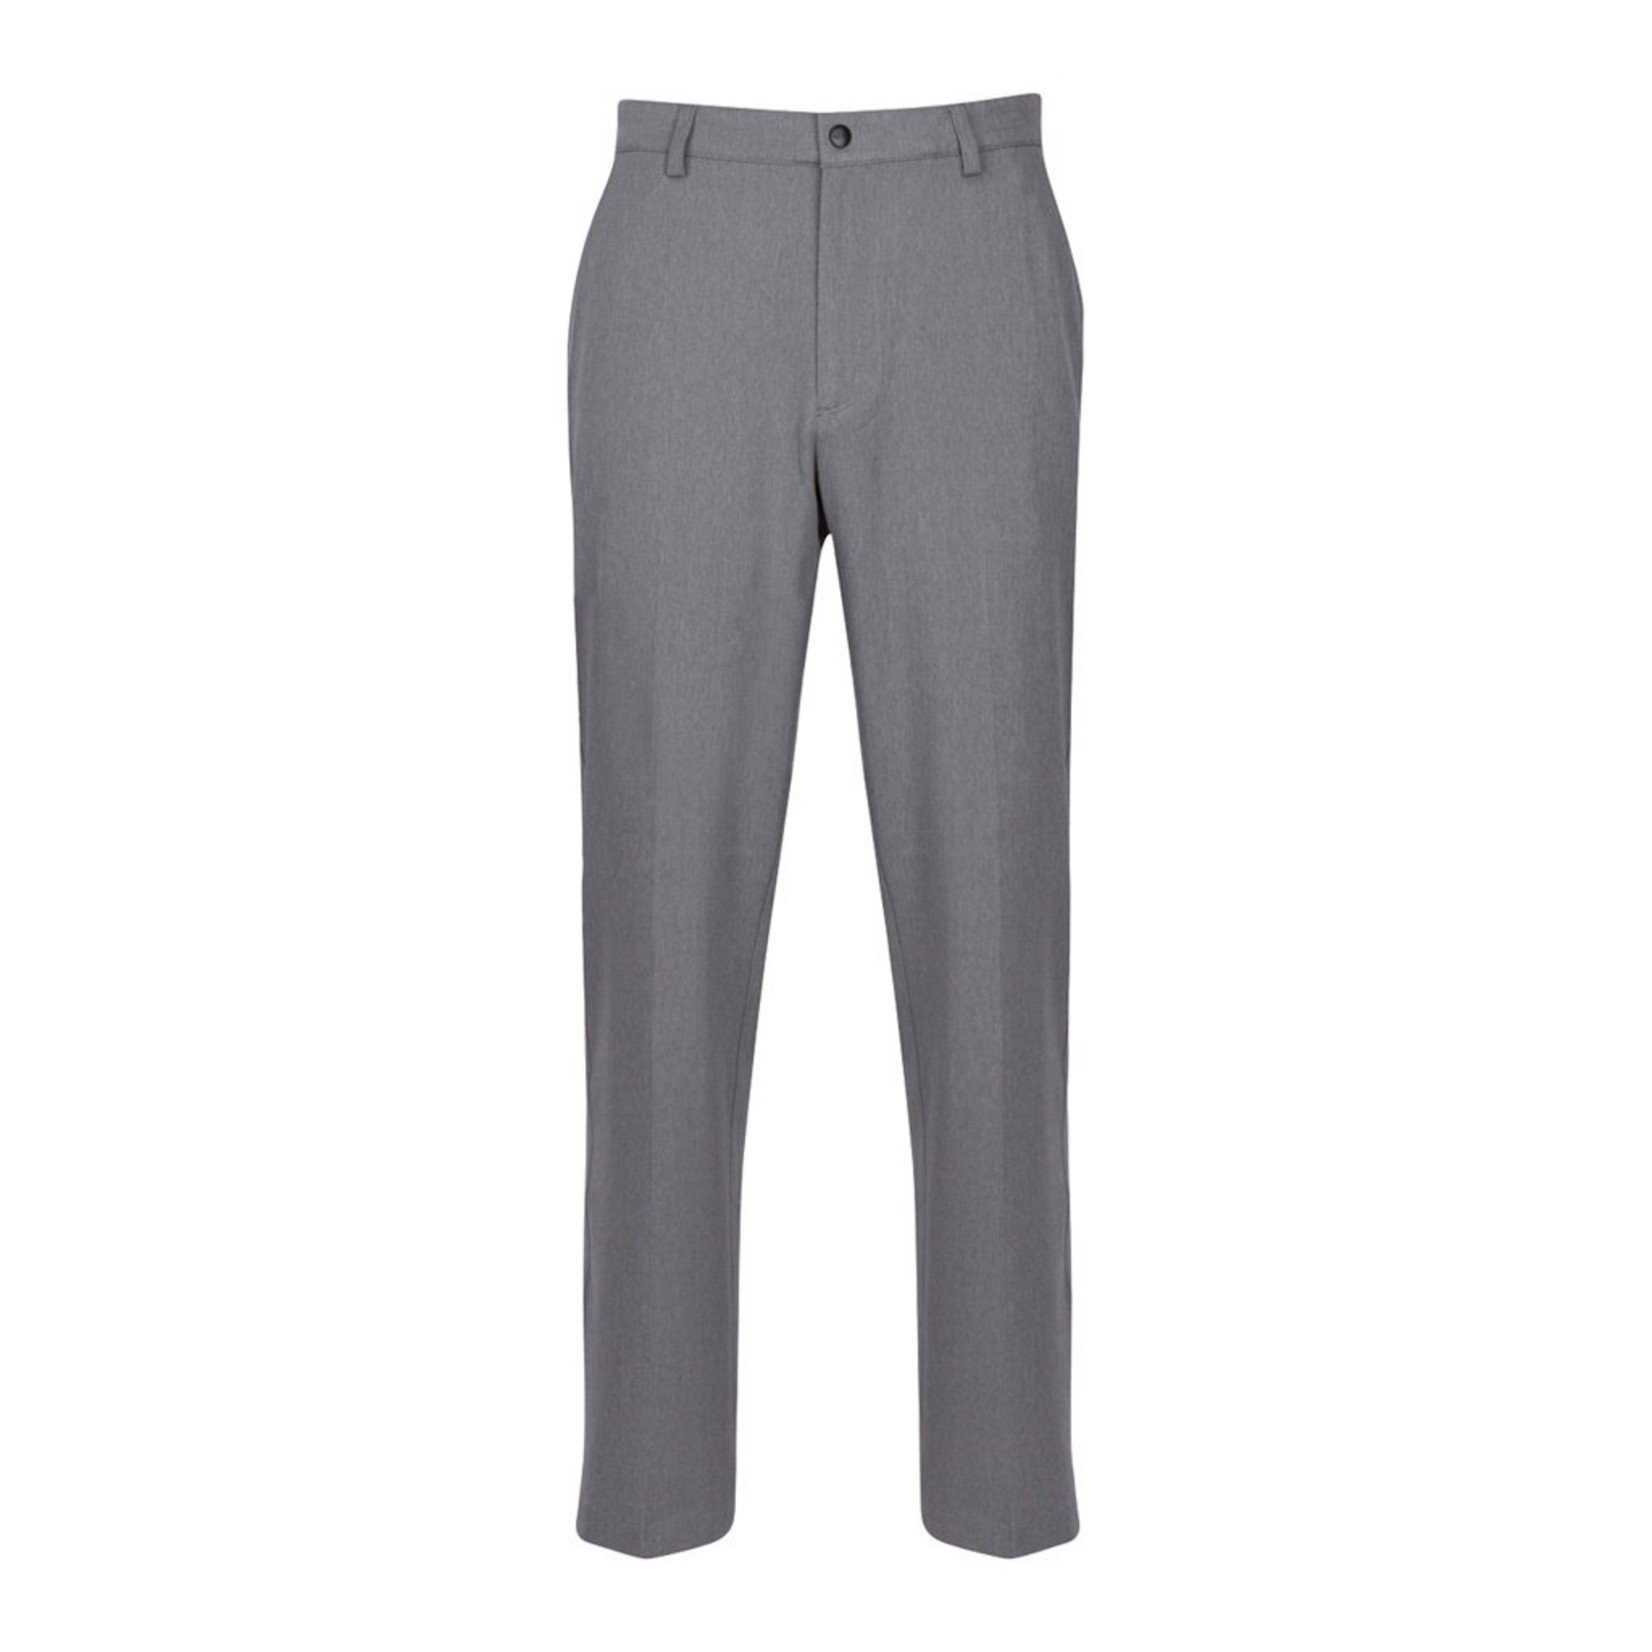 Greg Norman Apparel GN Classic Pro-Fit Pant